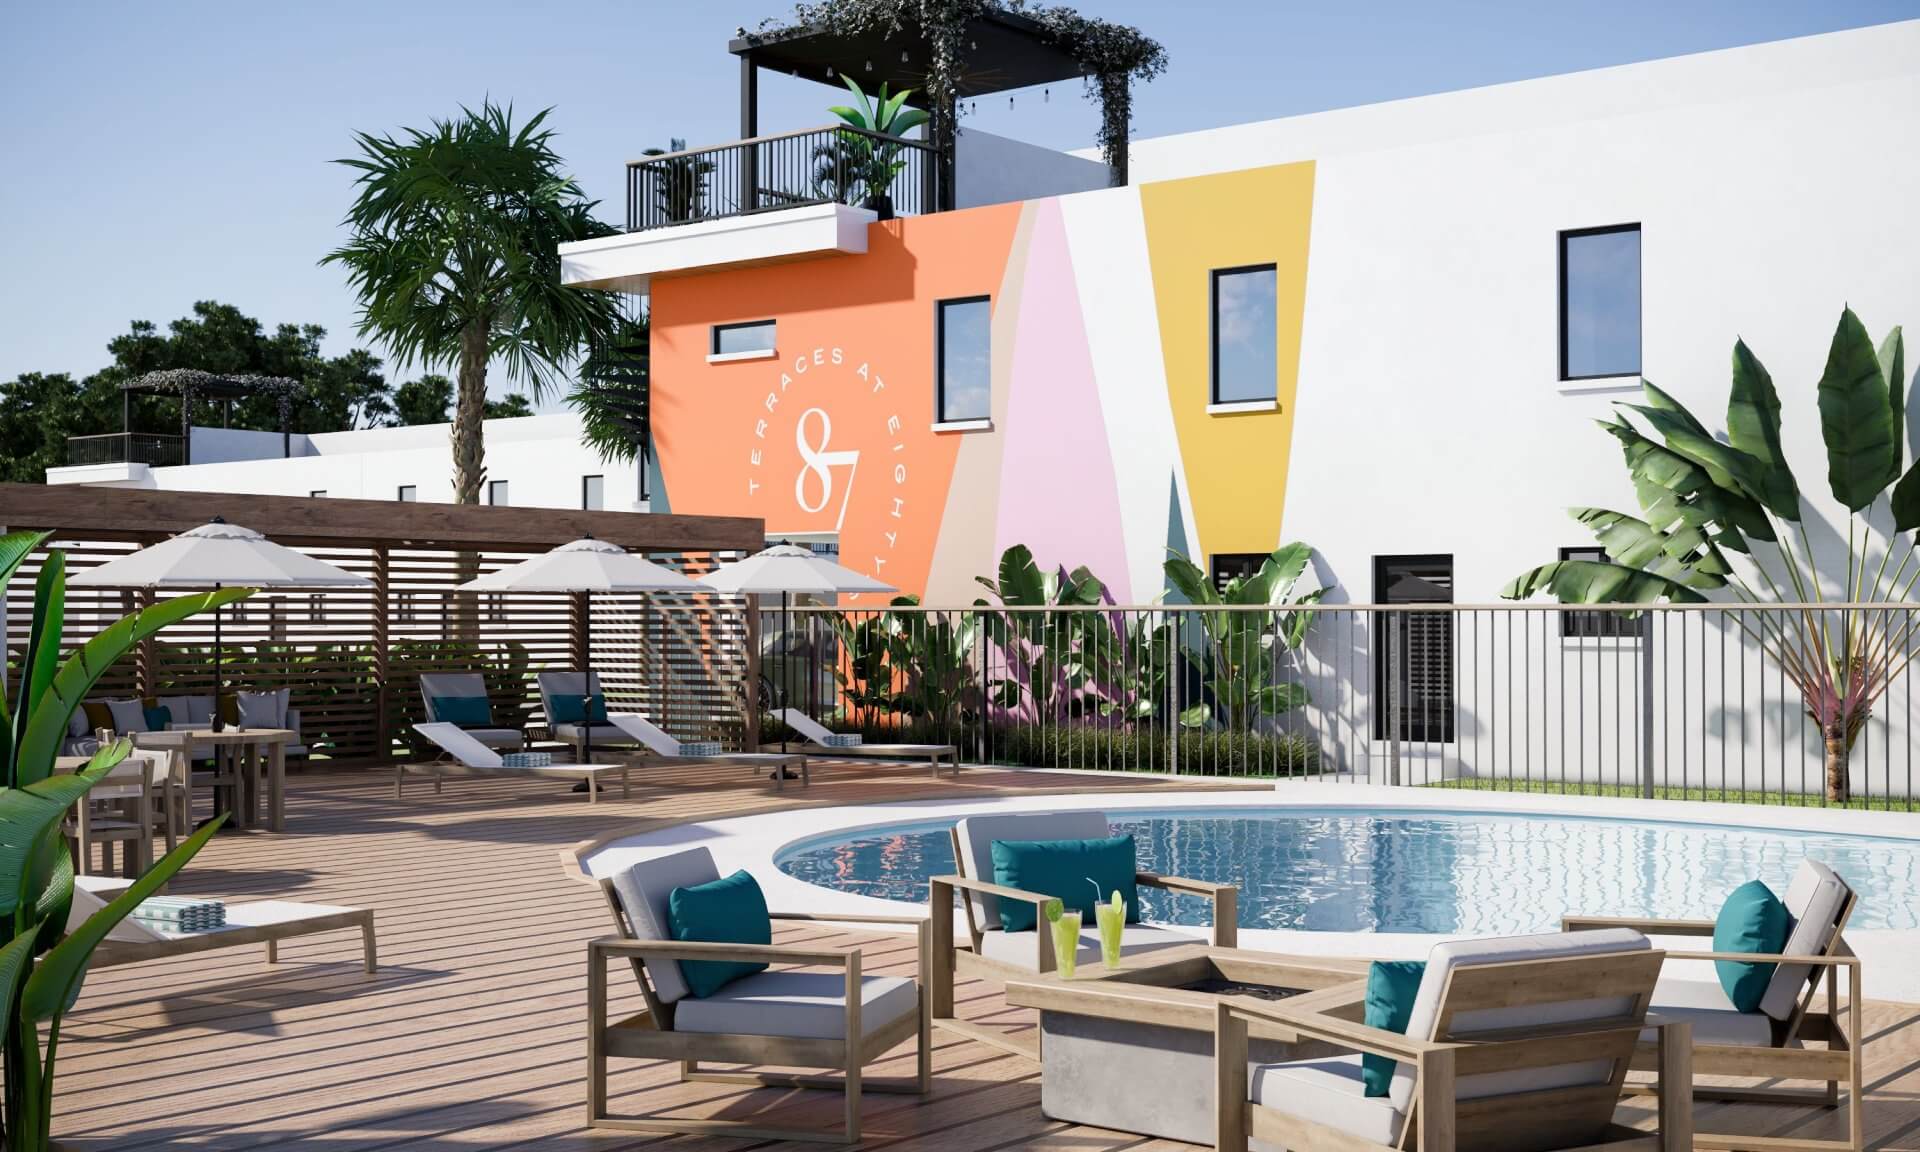 92-unit townhome community Terraces at 87th launches sales and breaks ground in north St. Pete